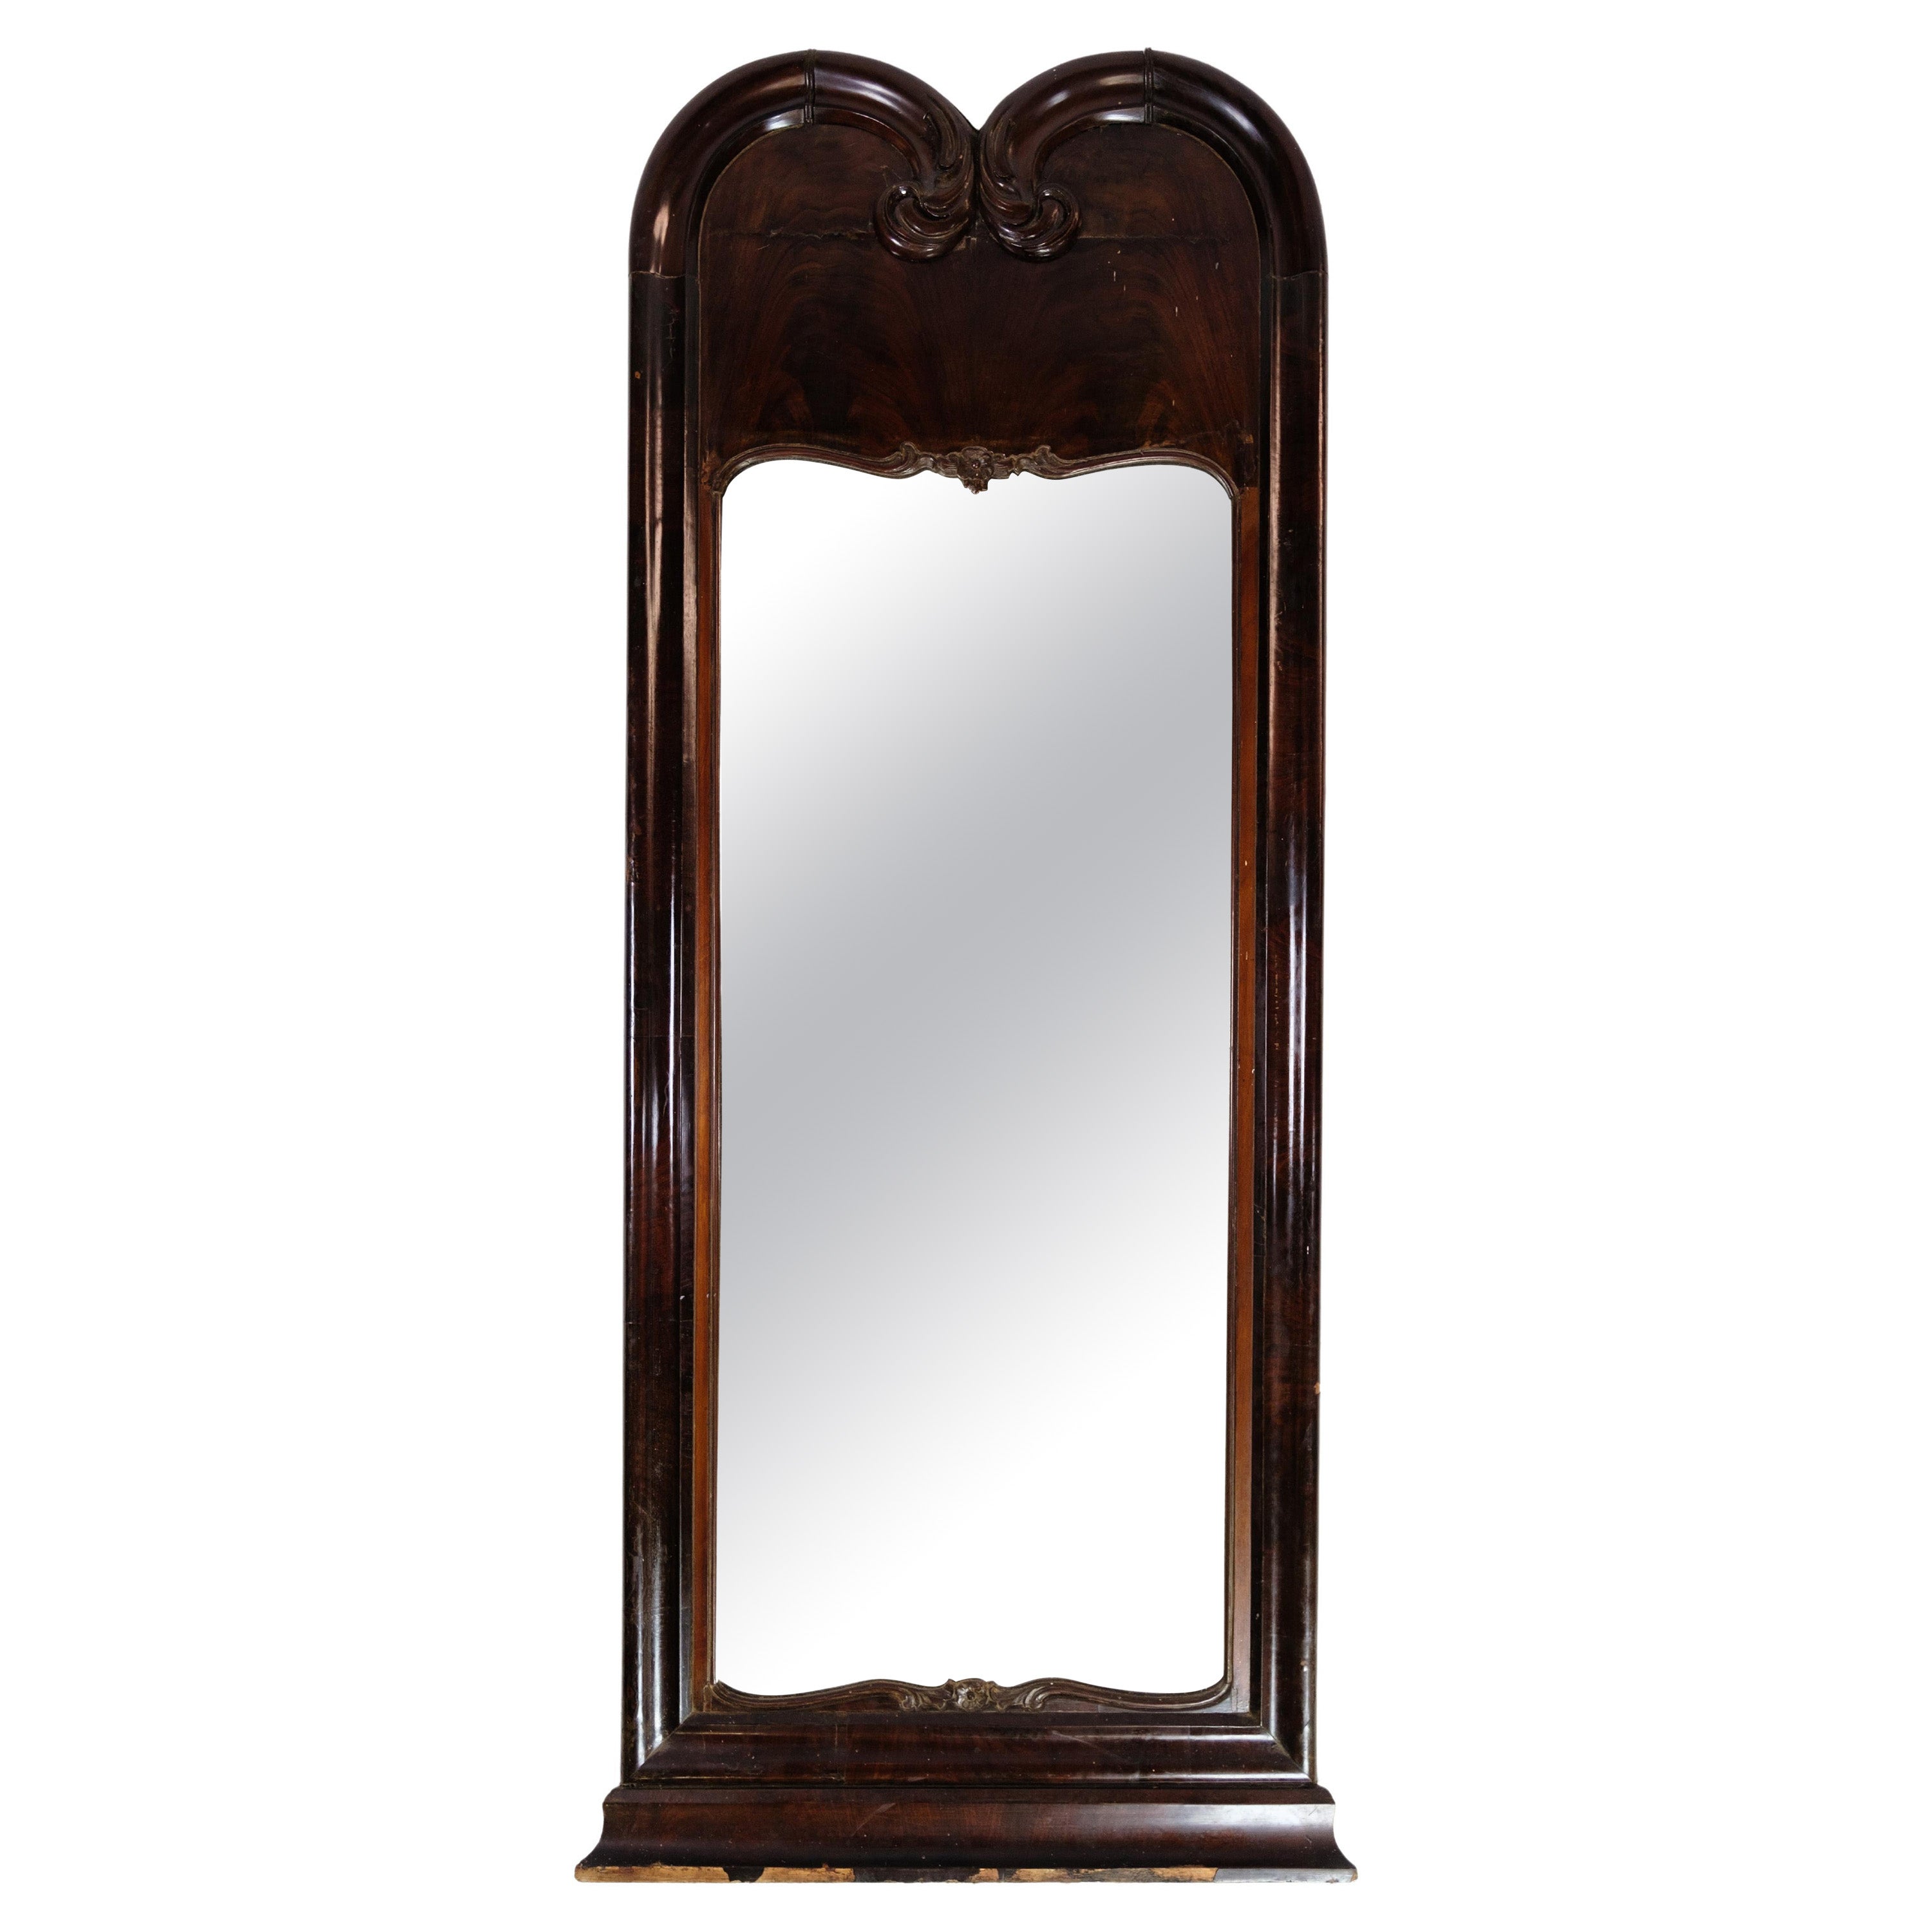 1840s Floor Mirrors and Full-Length Mirrors